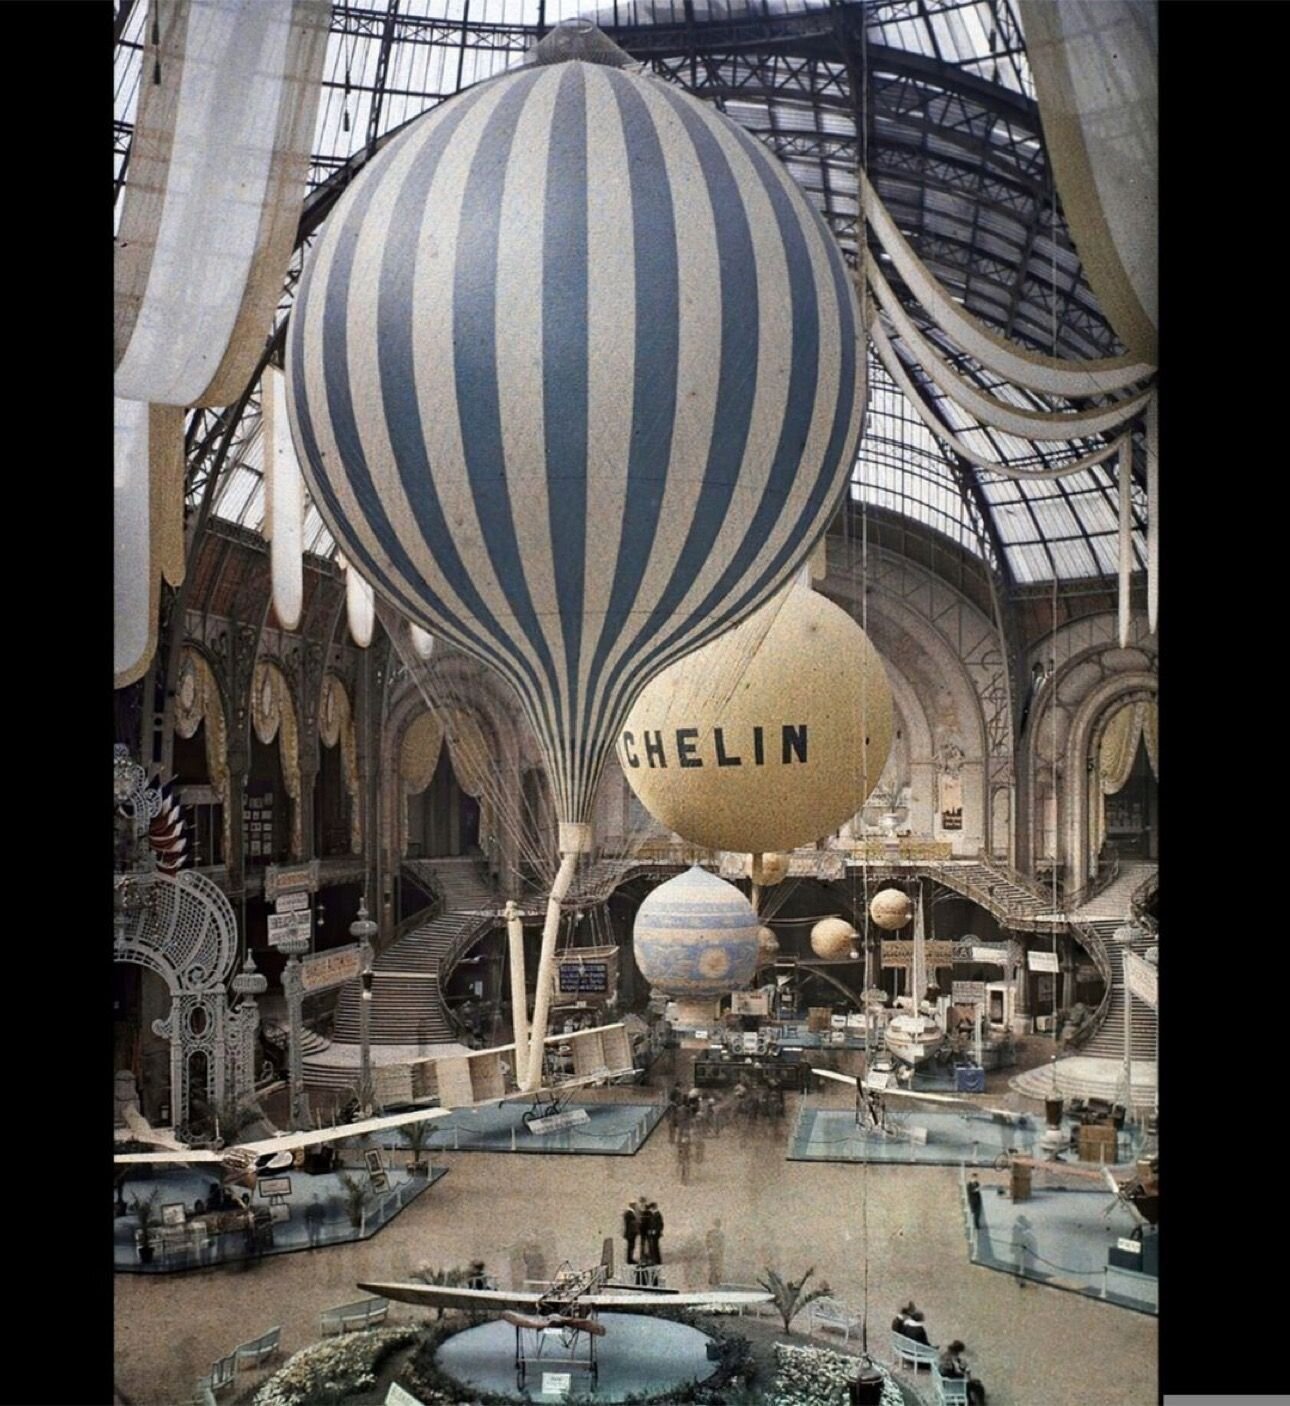 Autochrome Lumiere image of hot air balloons on display at the Grand Palais in Paris, France in original color, 1914.⁠
⁠
Auguste and Louis Lumi&egrave;re invented the Autochrome, a positive color transparency on glass, in 1907 and manufactured it unt